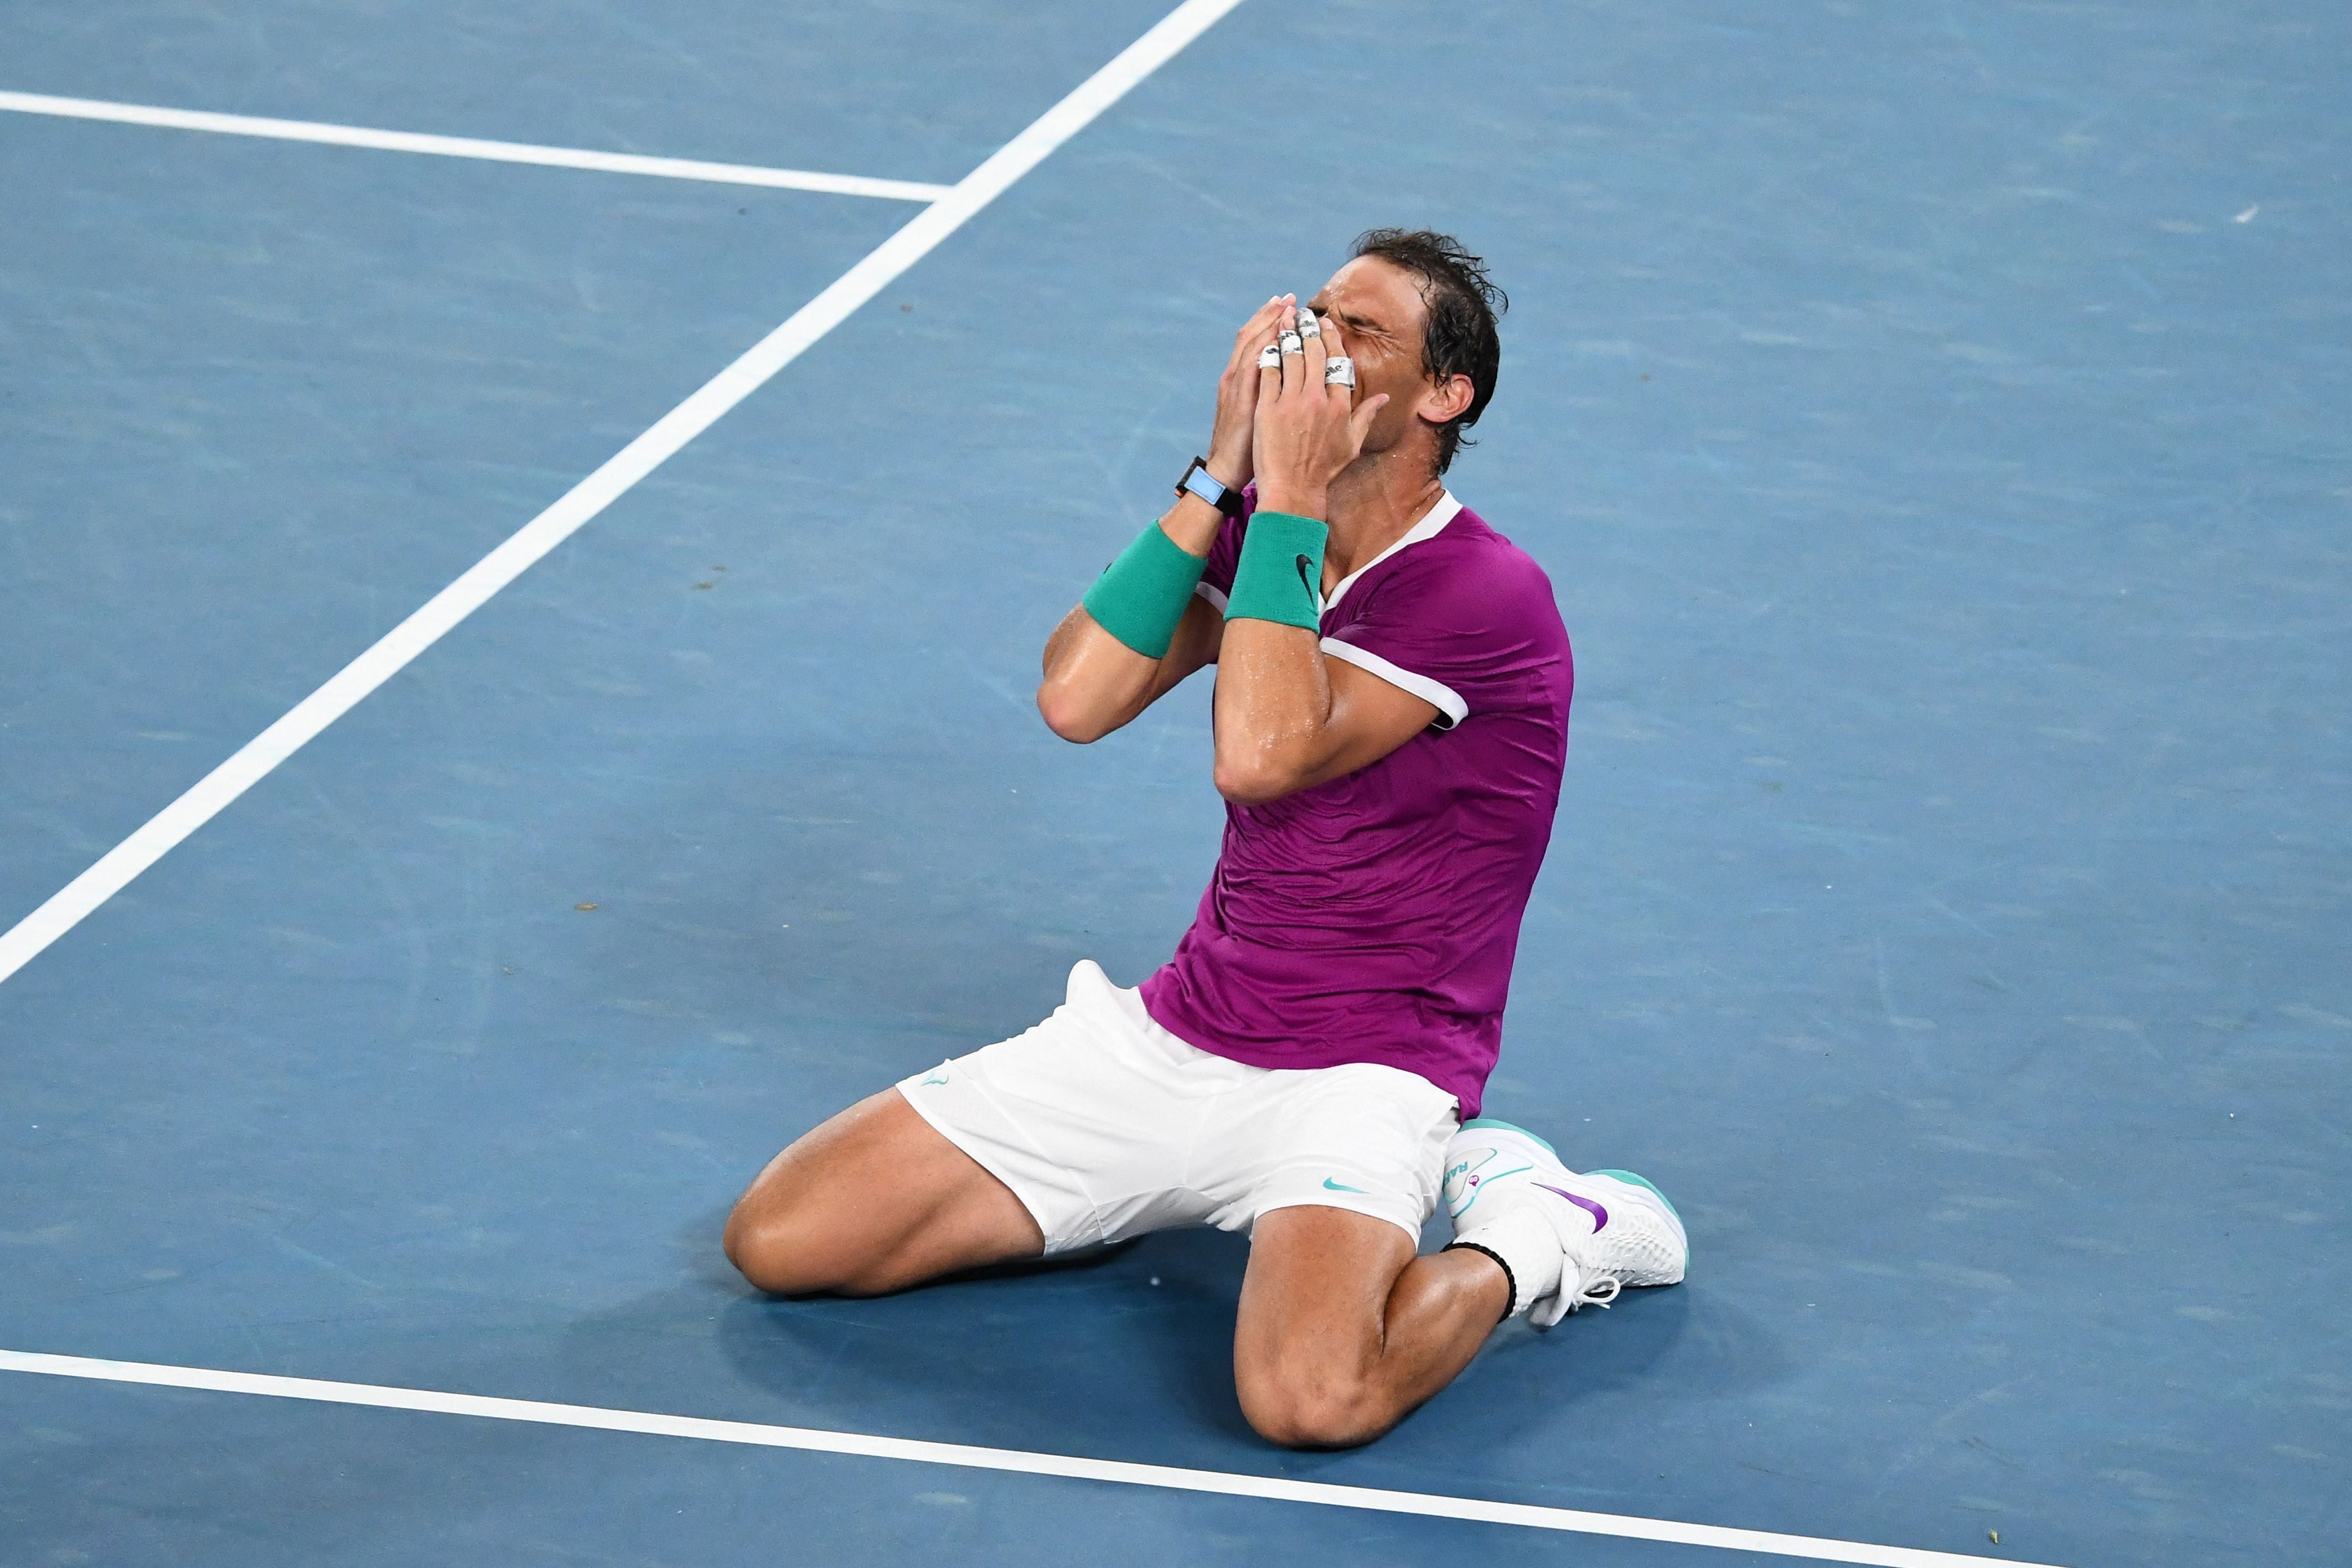 Rafael Nadal was overwhelmed after winning a 21st grand slam title